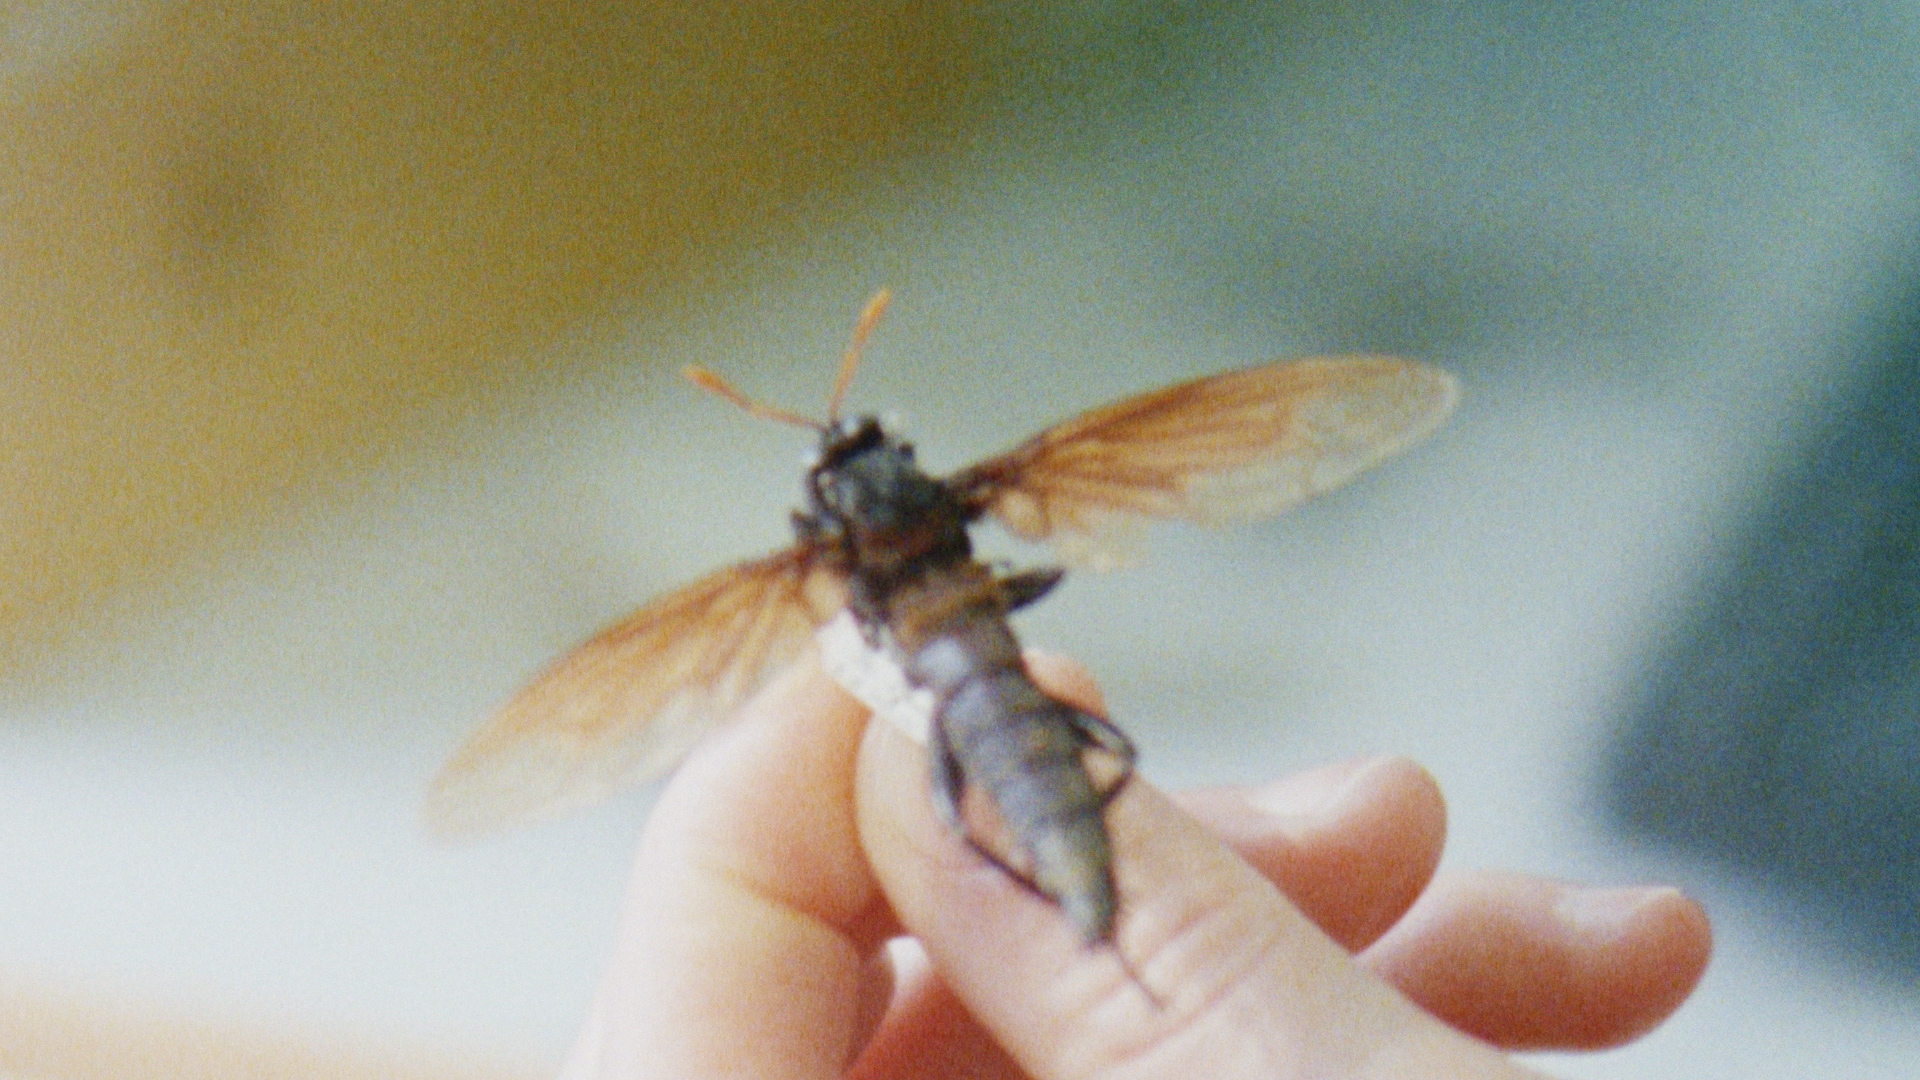 Still from the film ‘I’ll be Back’ showing a hand presenting a preserved insect.